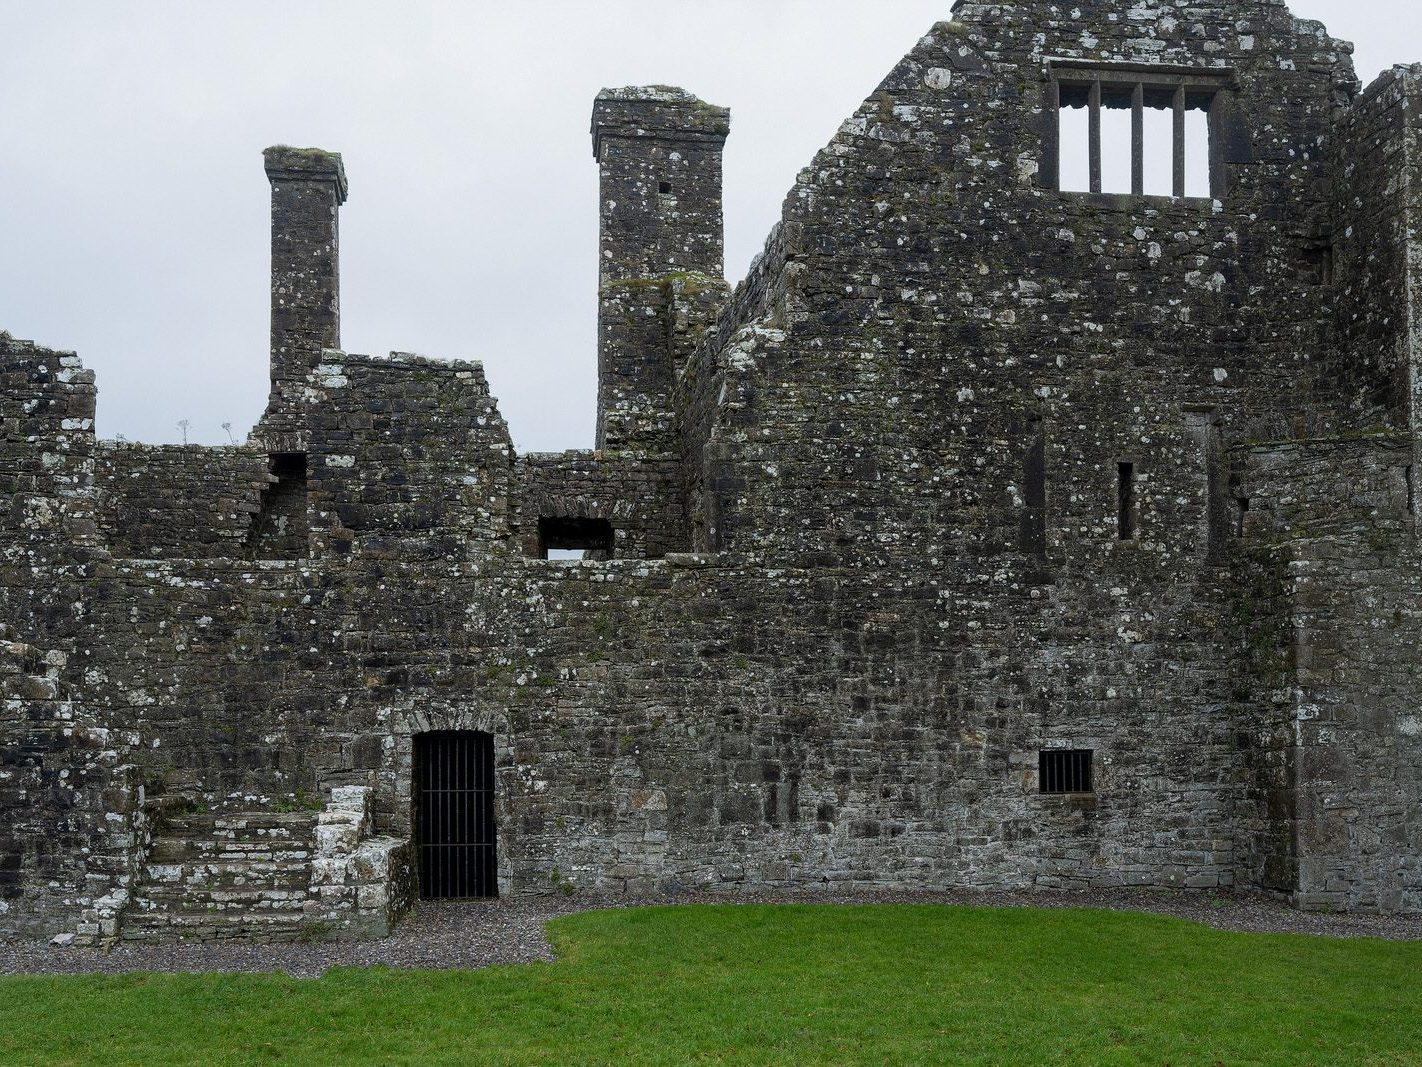 BECTIVE ABBEY WHICH I VISITED LAST CHRISTMAS [THERE WERE NO OTHER VISITORS AS IT WAS A VERY WET DAY]--225256-1